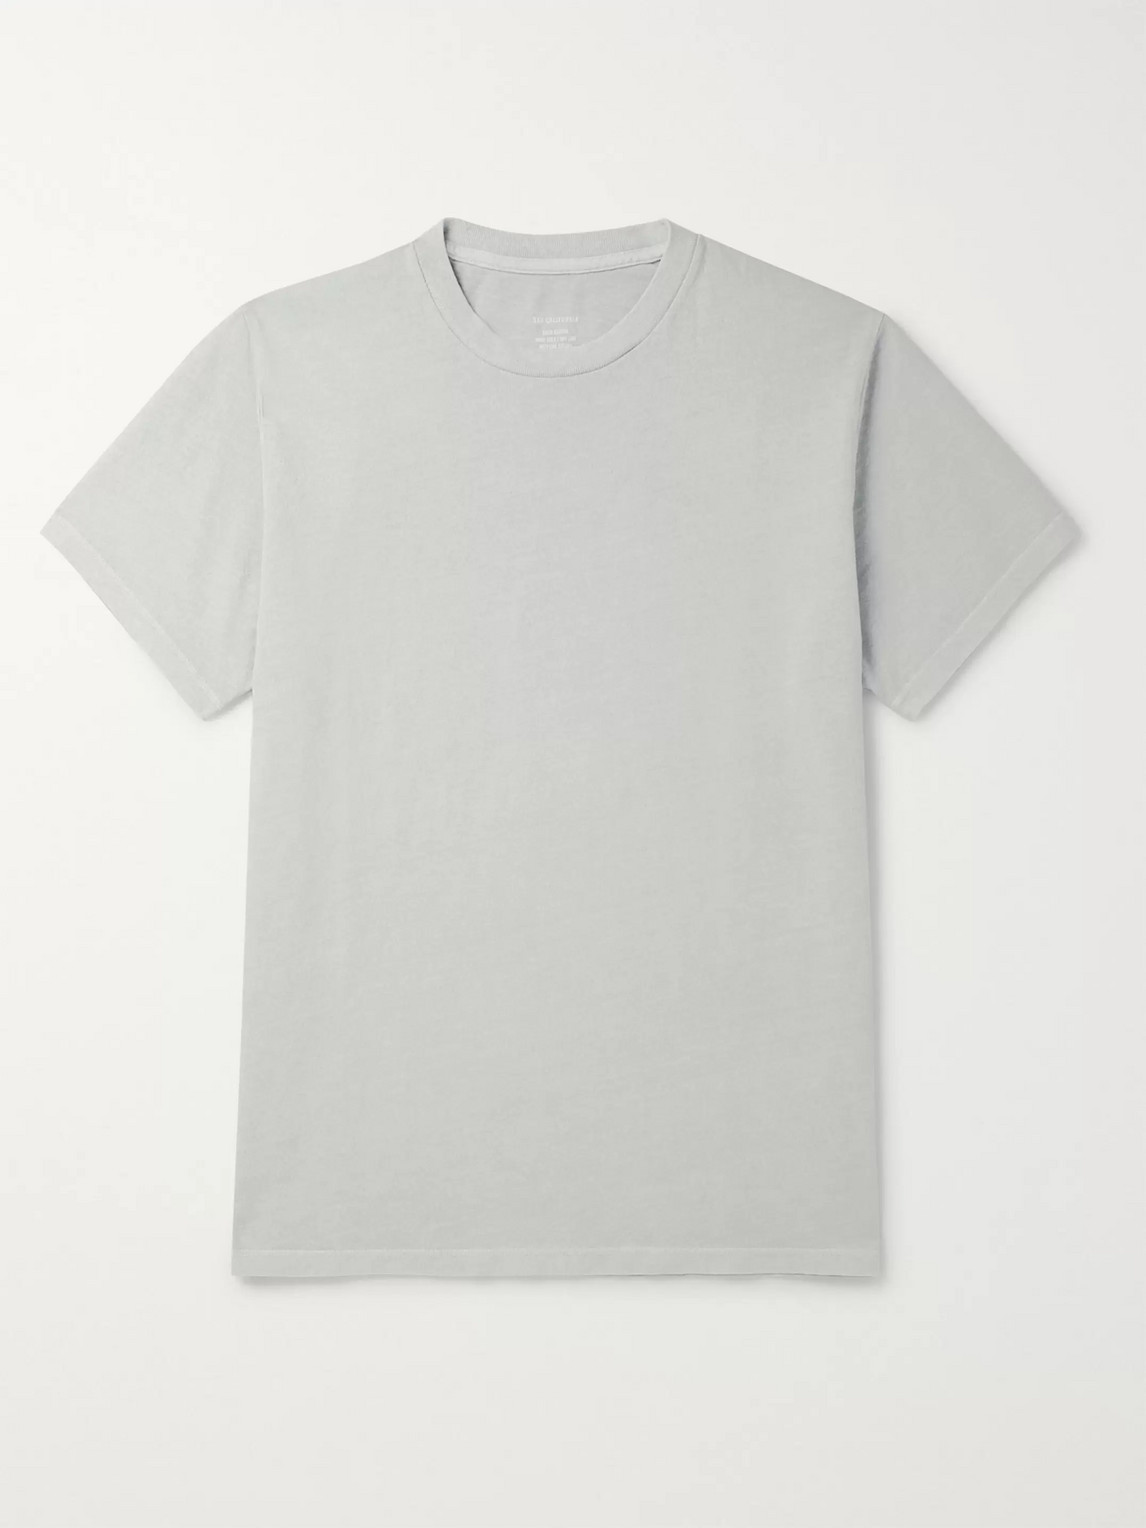 Save Khaki United Cotton-jersey T-shirt In Gray